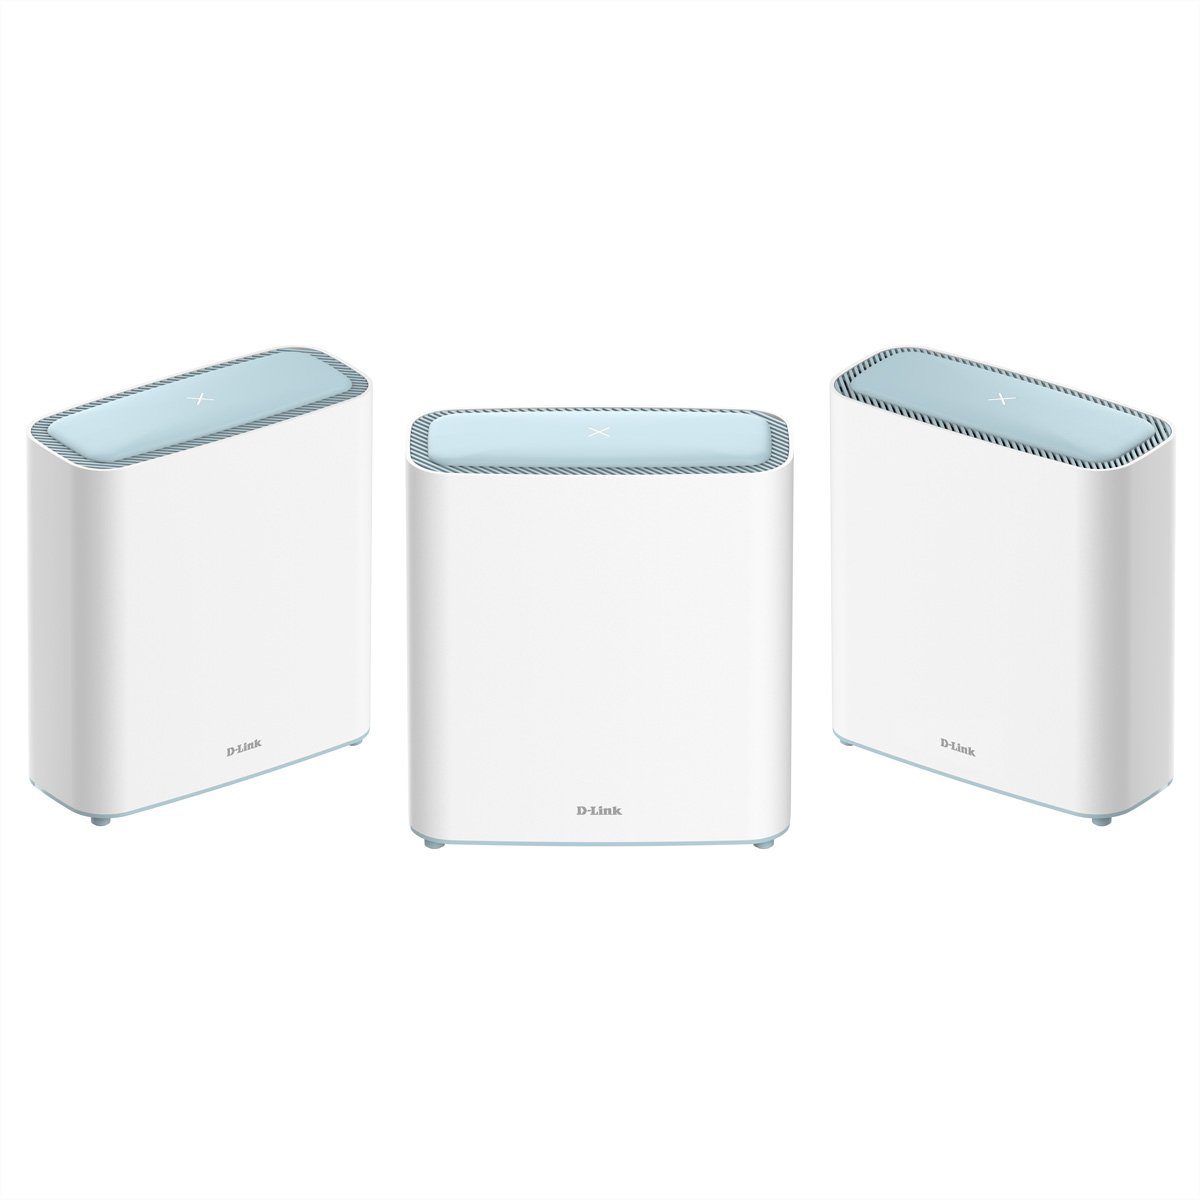 M32-3 Mesh 6, WiFi MU-MIMO AI, AX3200, D-Link WLAN-Repeater, 3-Pack System, EaglePro